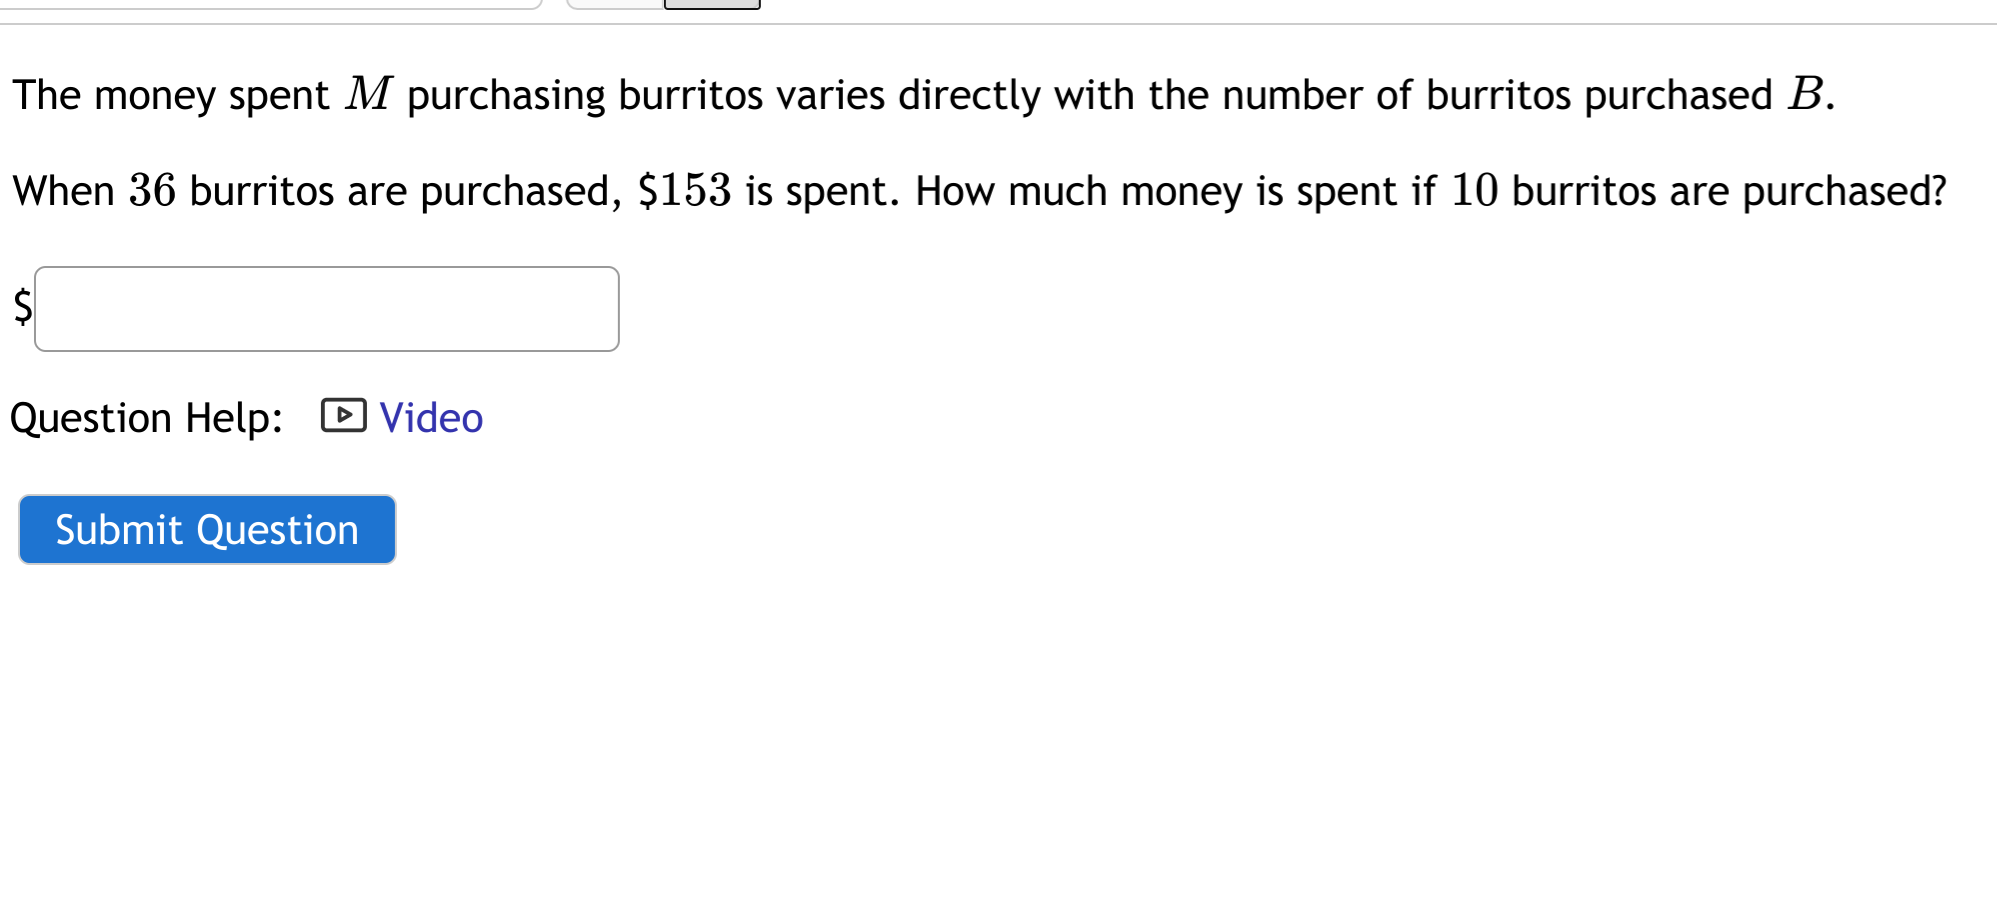 The money spent M purchasing burritos varies directly with the number of burritos purchased B.
When 36 burritos are purchased, $153 is spent. How much money is spent if 10 burritos are purchased?
